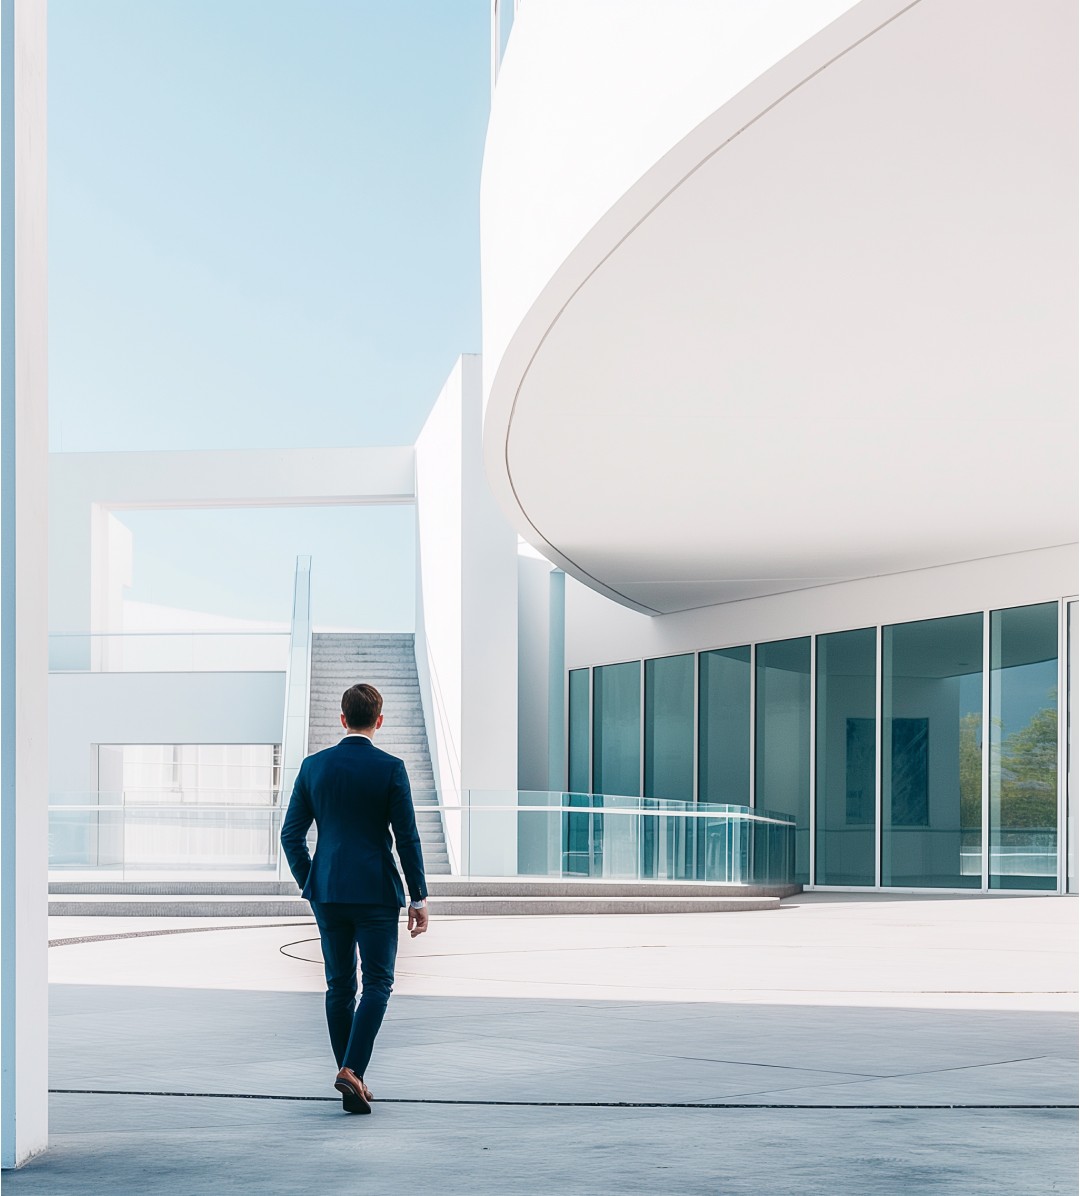 Man in front of a white building